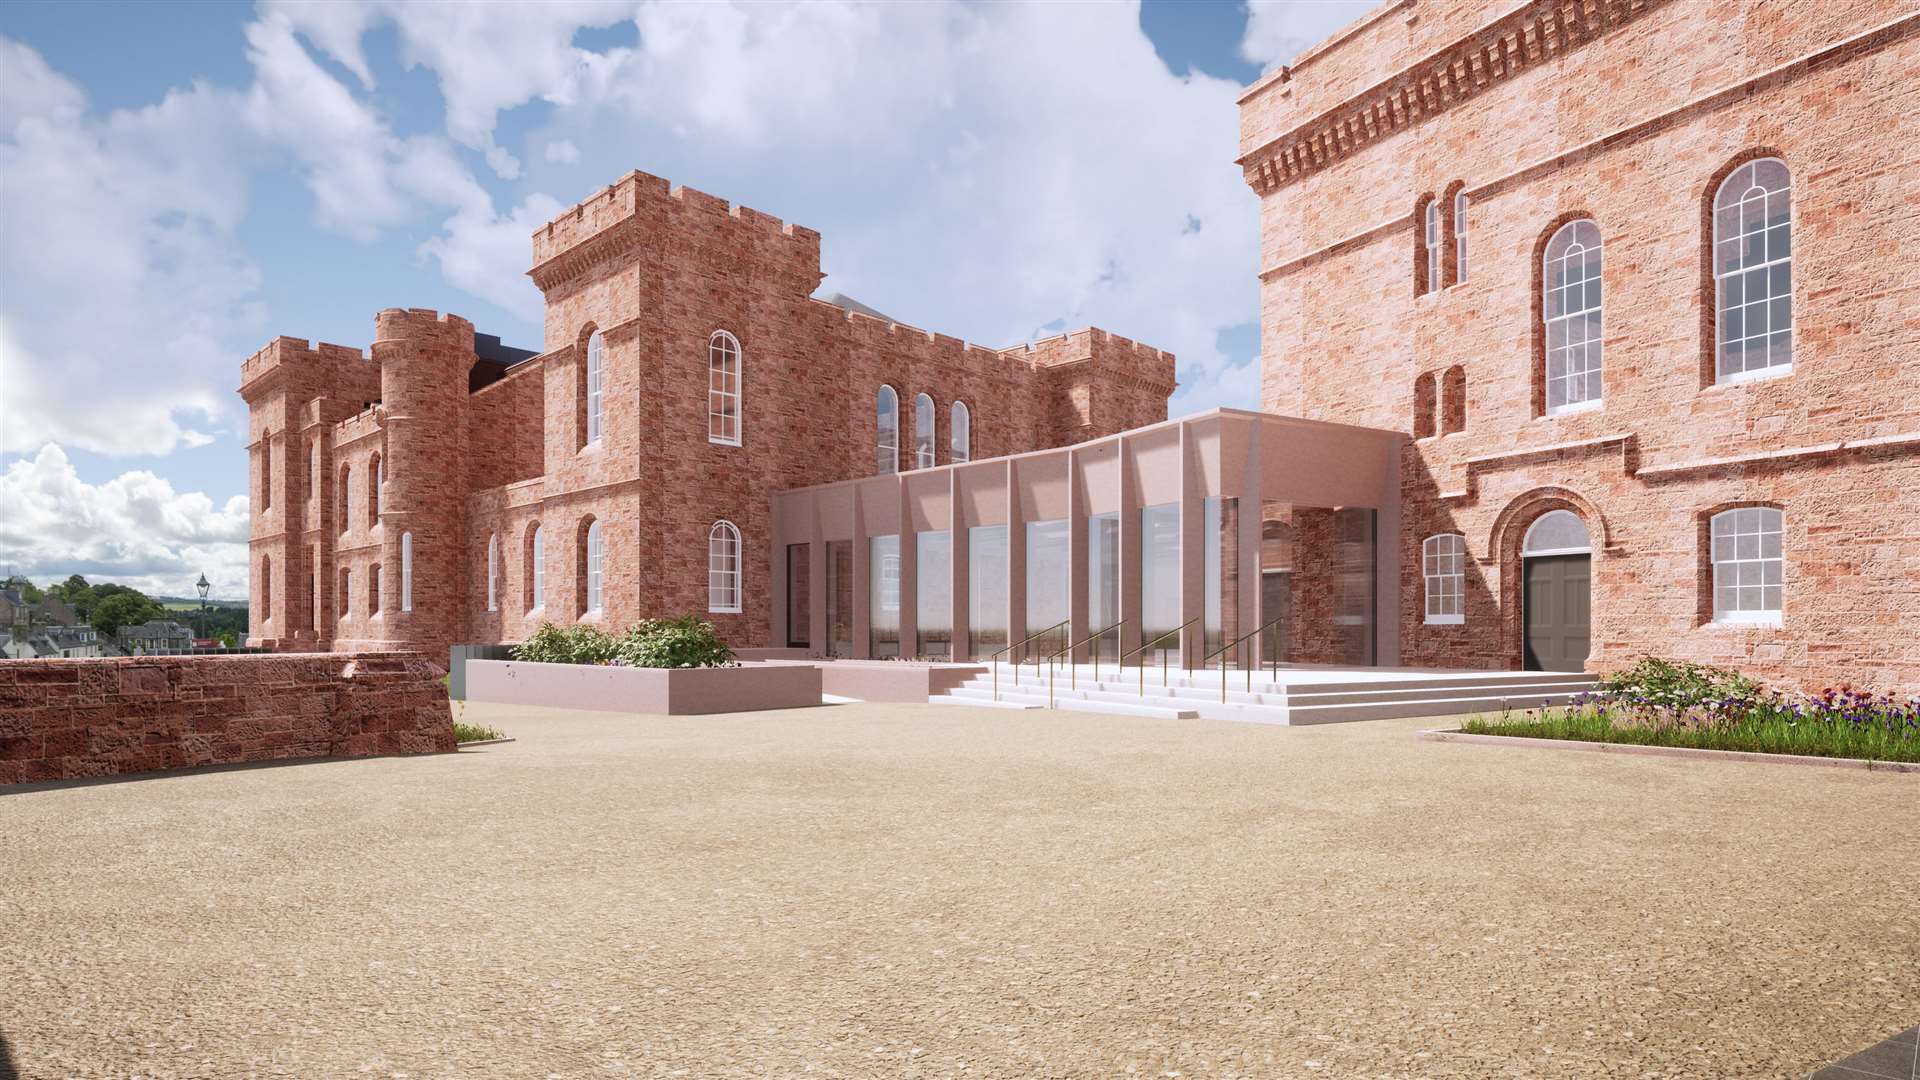 An illustration of the planned transformation of Inverness Castle.